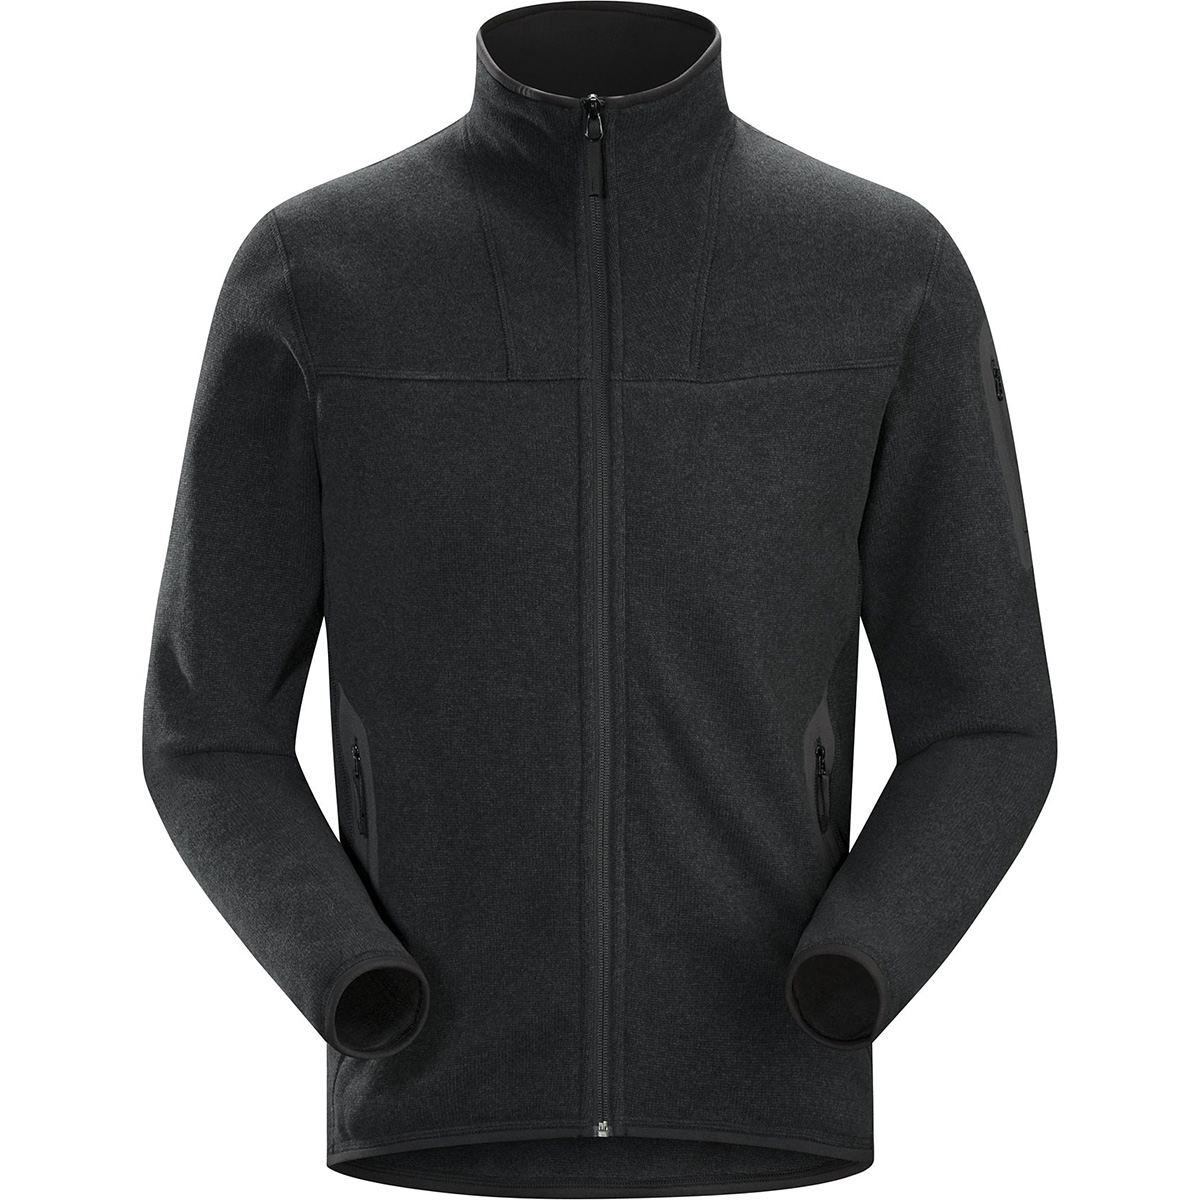 Arc'teryx Covert Cardigan, men's, Spring 2019 colors of discontinued ...